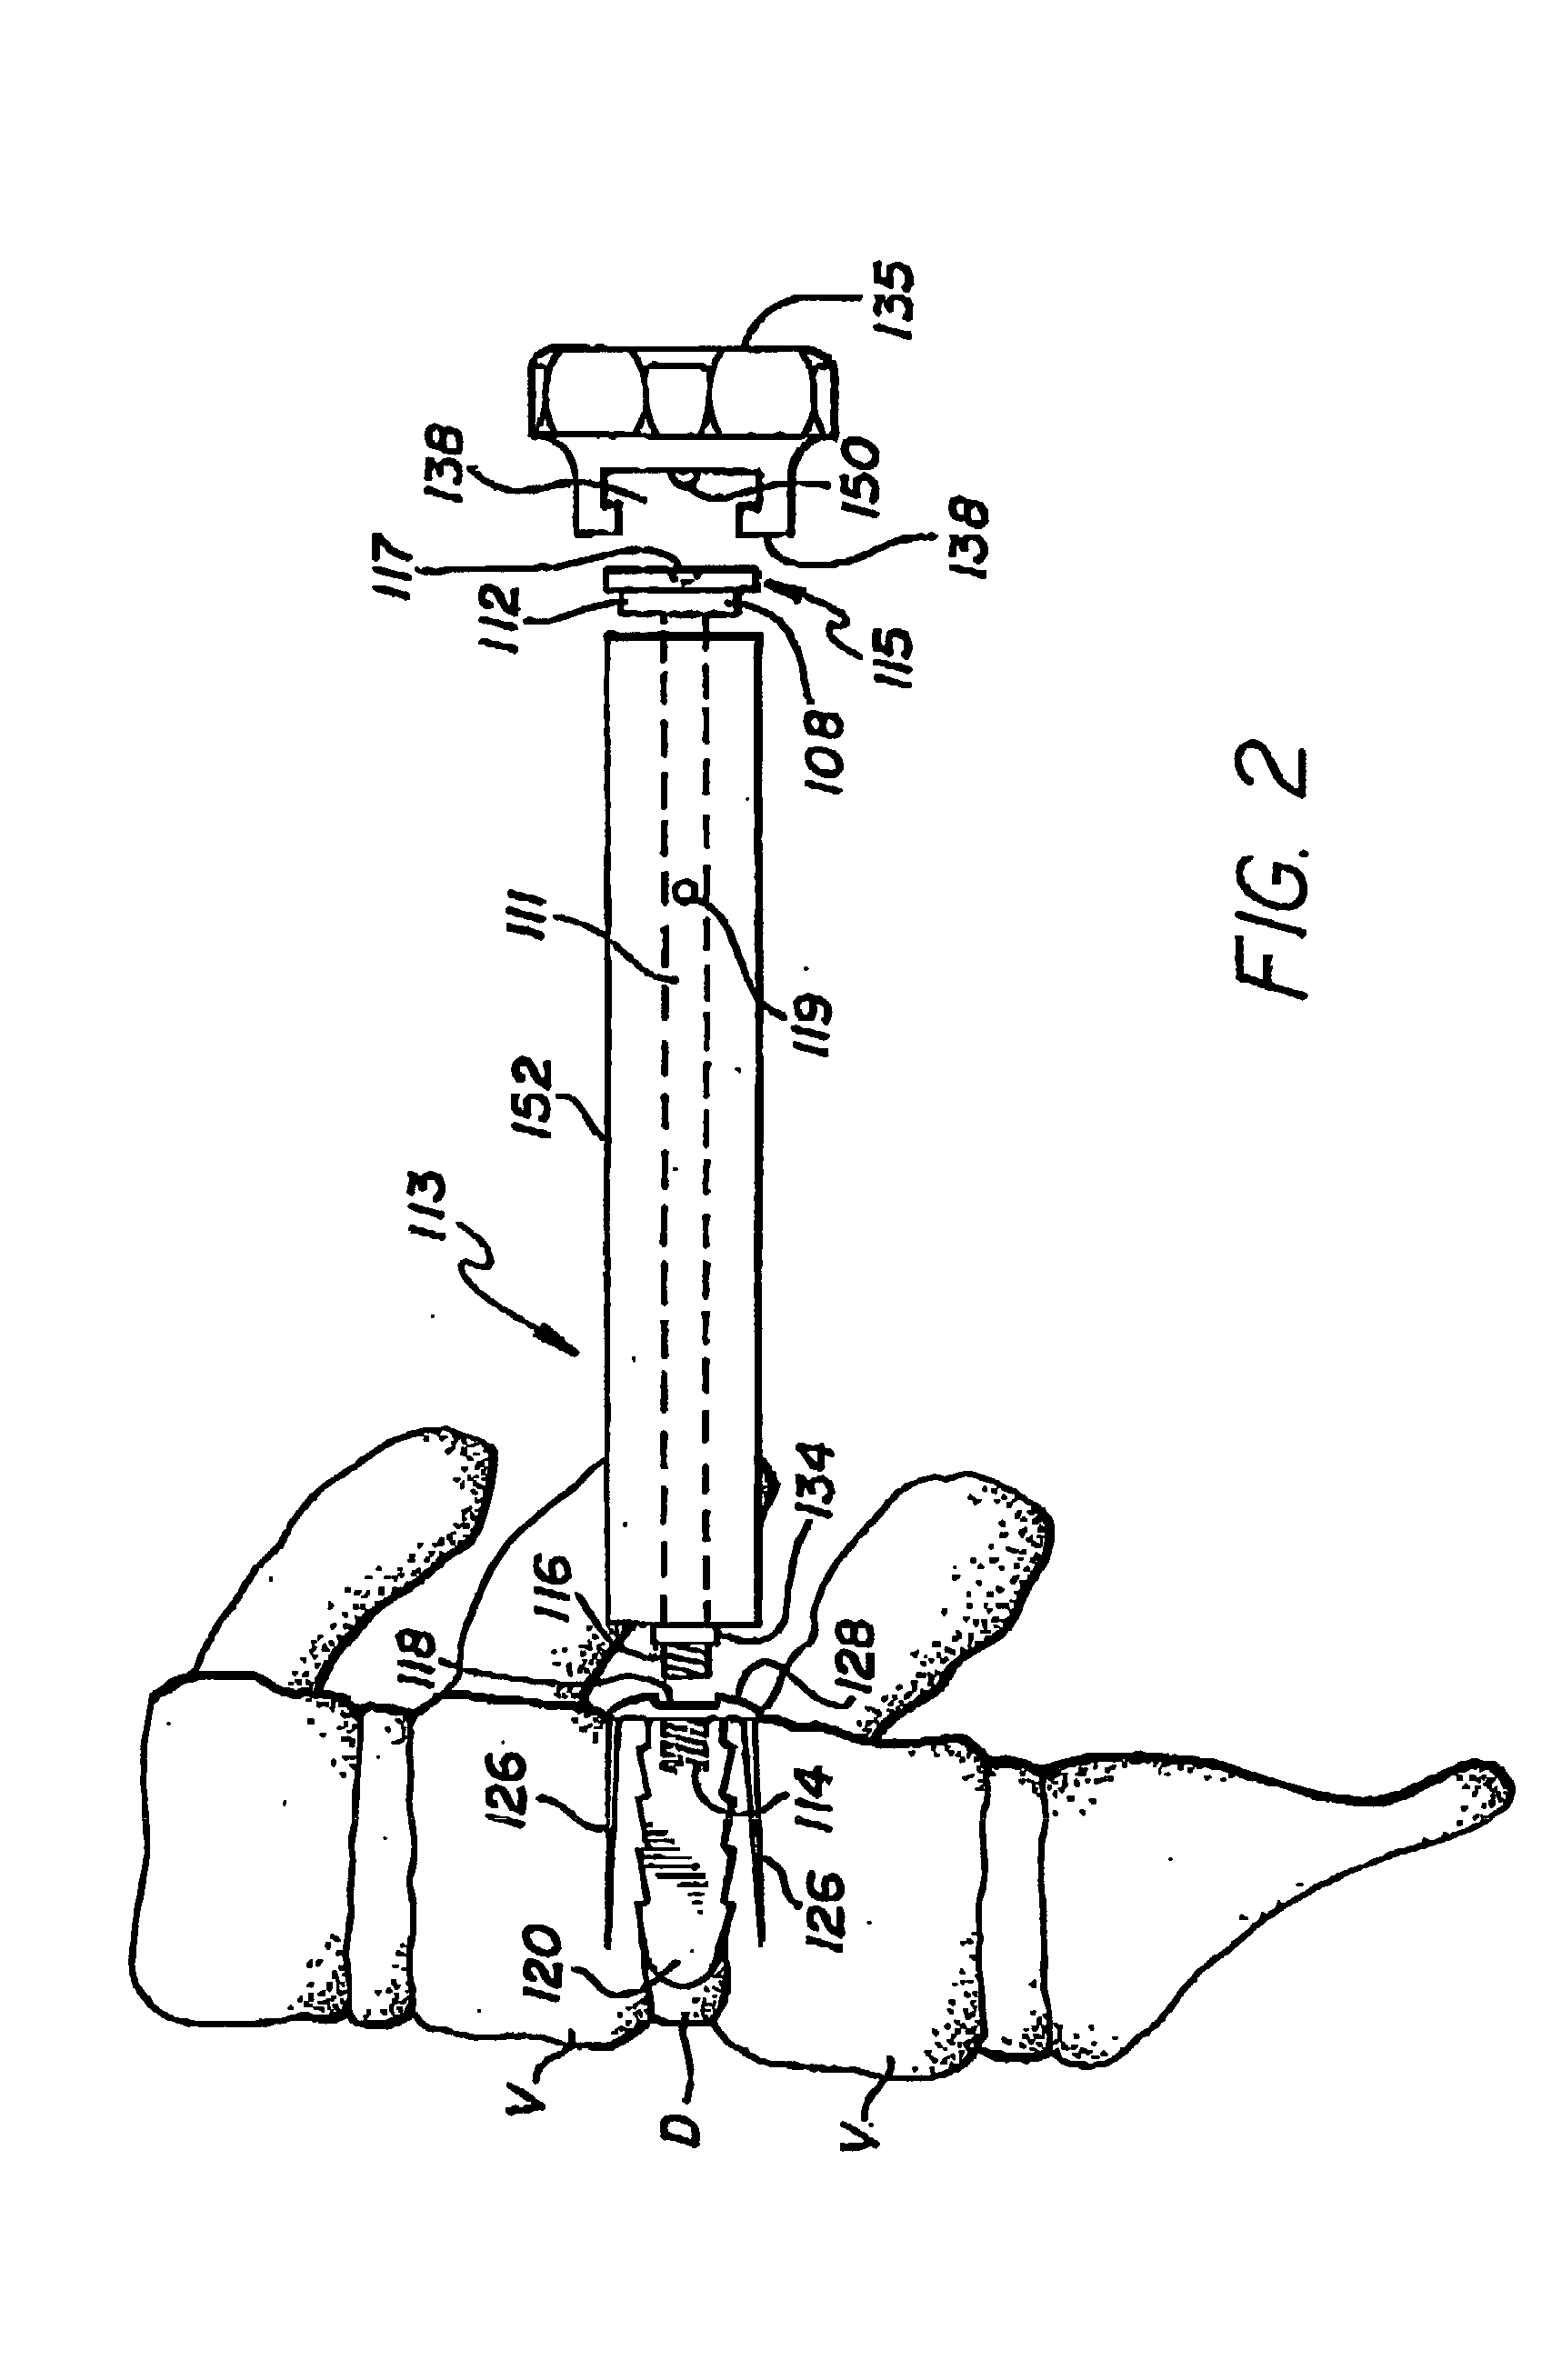 Apparatus and method of inserting spinal implants